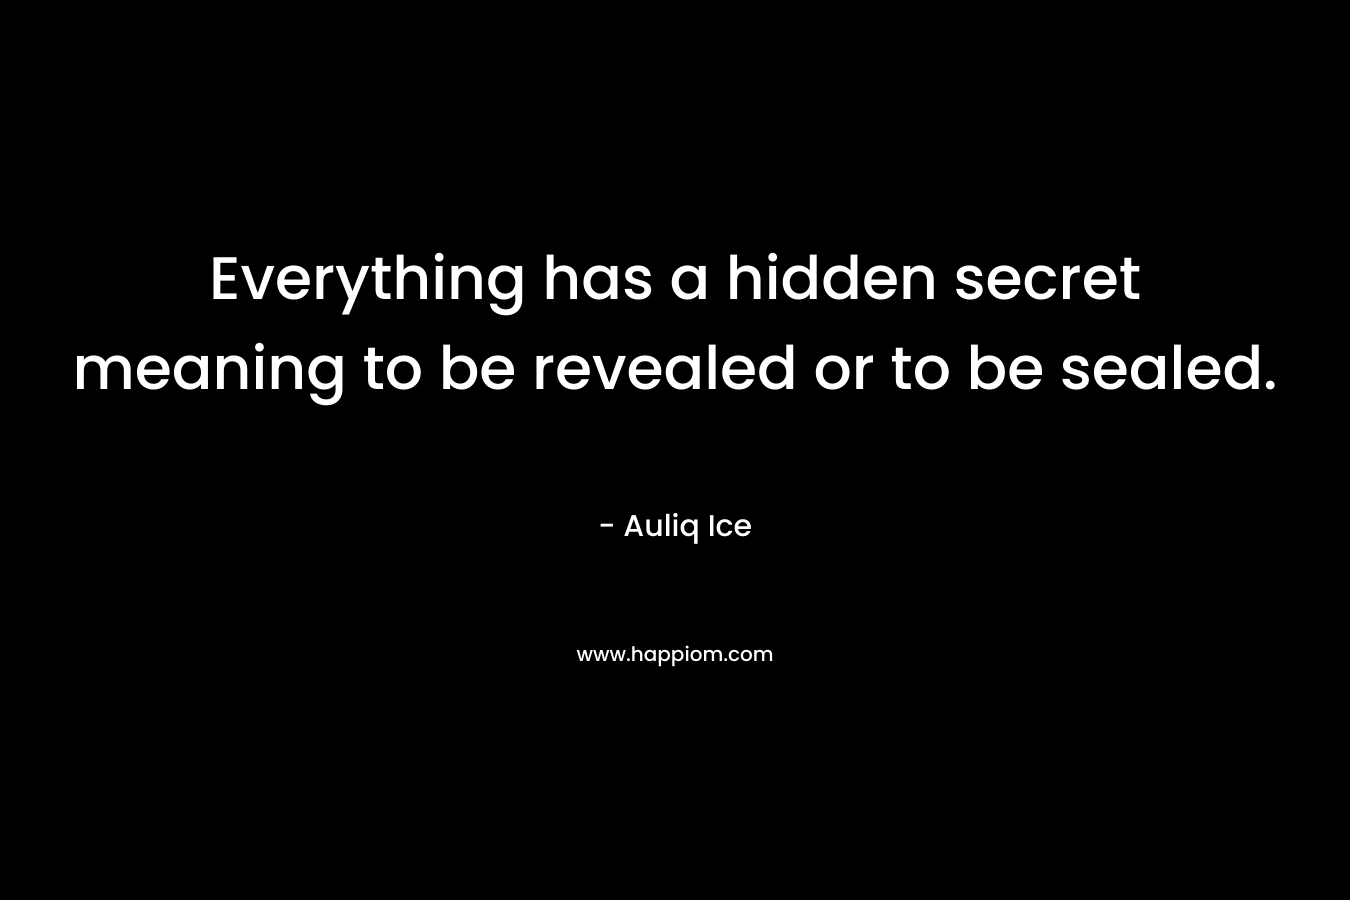 Everything has a hidden secret meaning to be revealed or to be sealed. – Auliq Ice